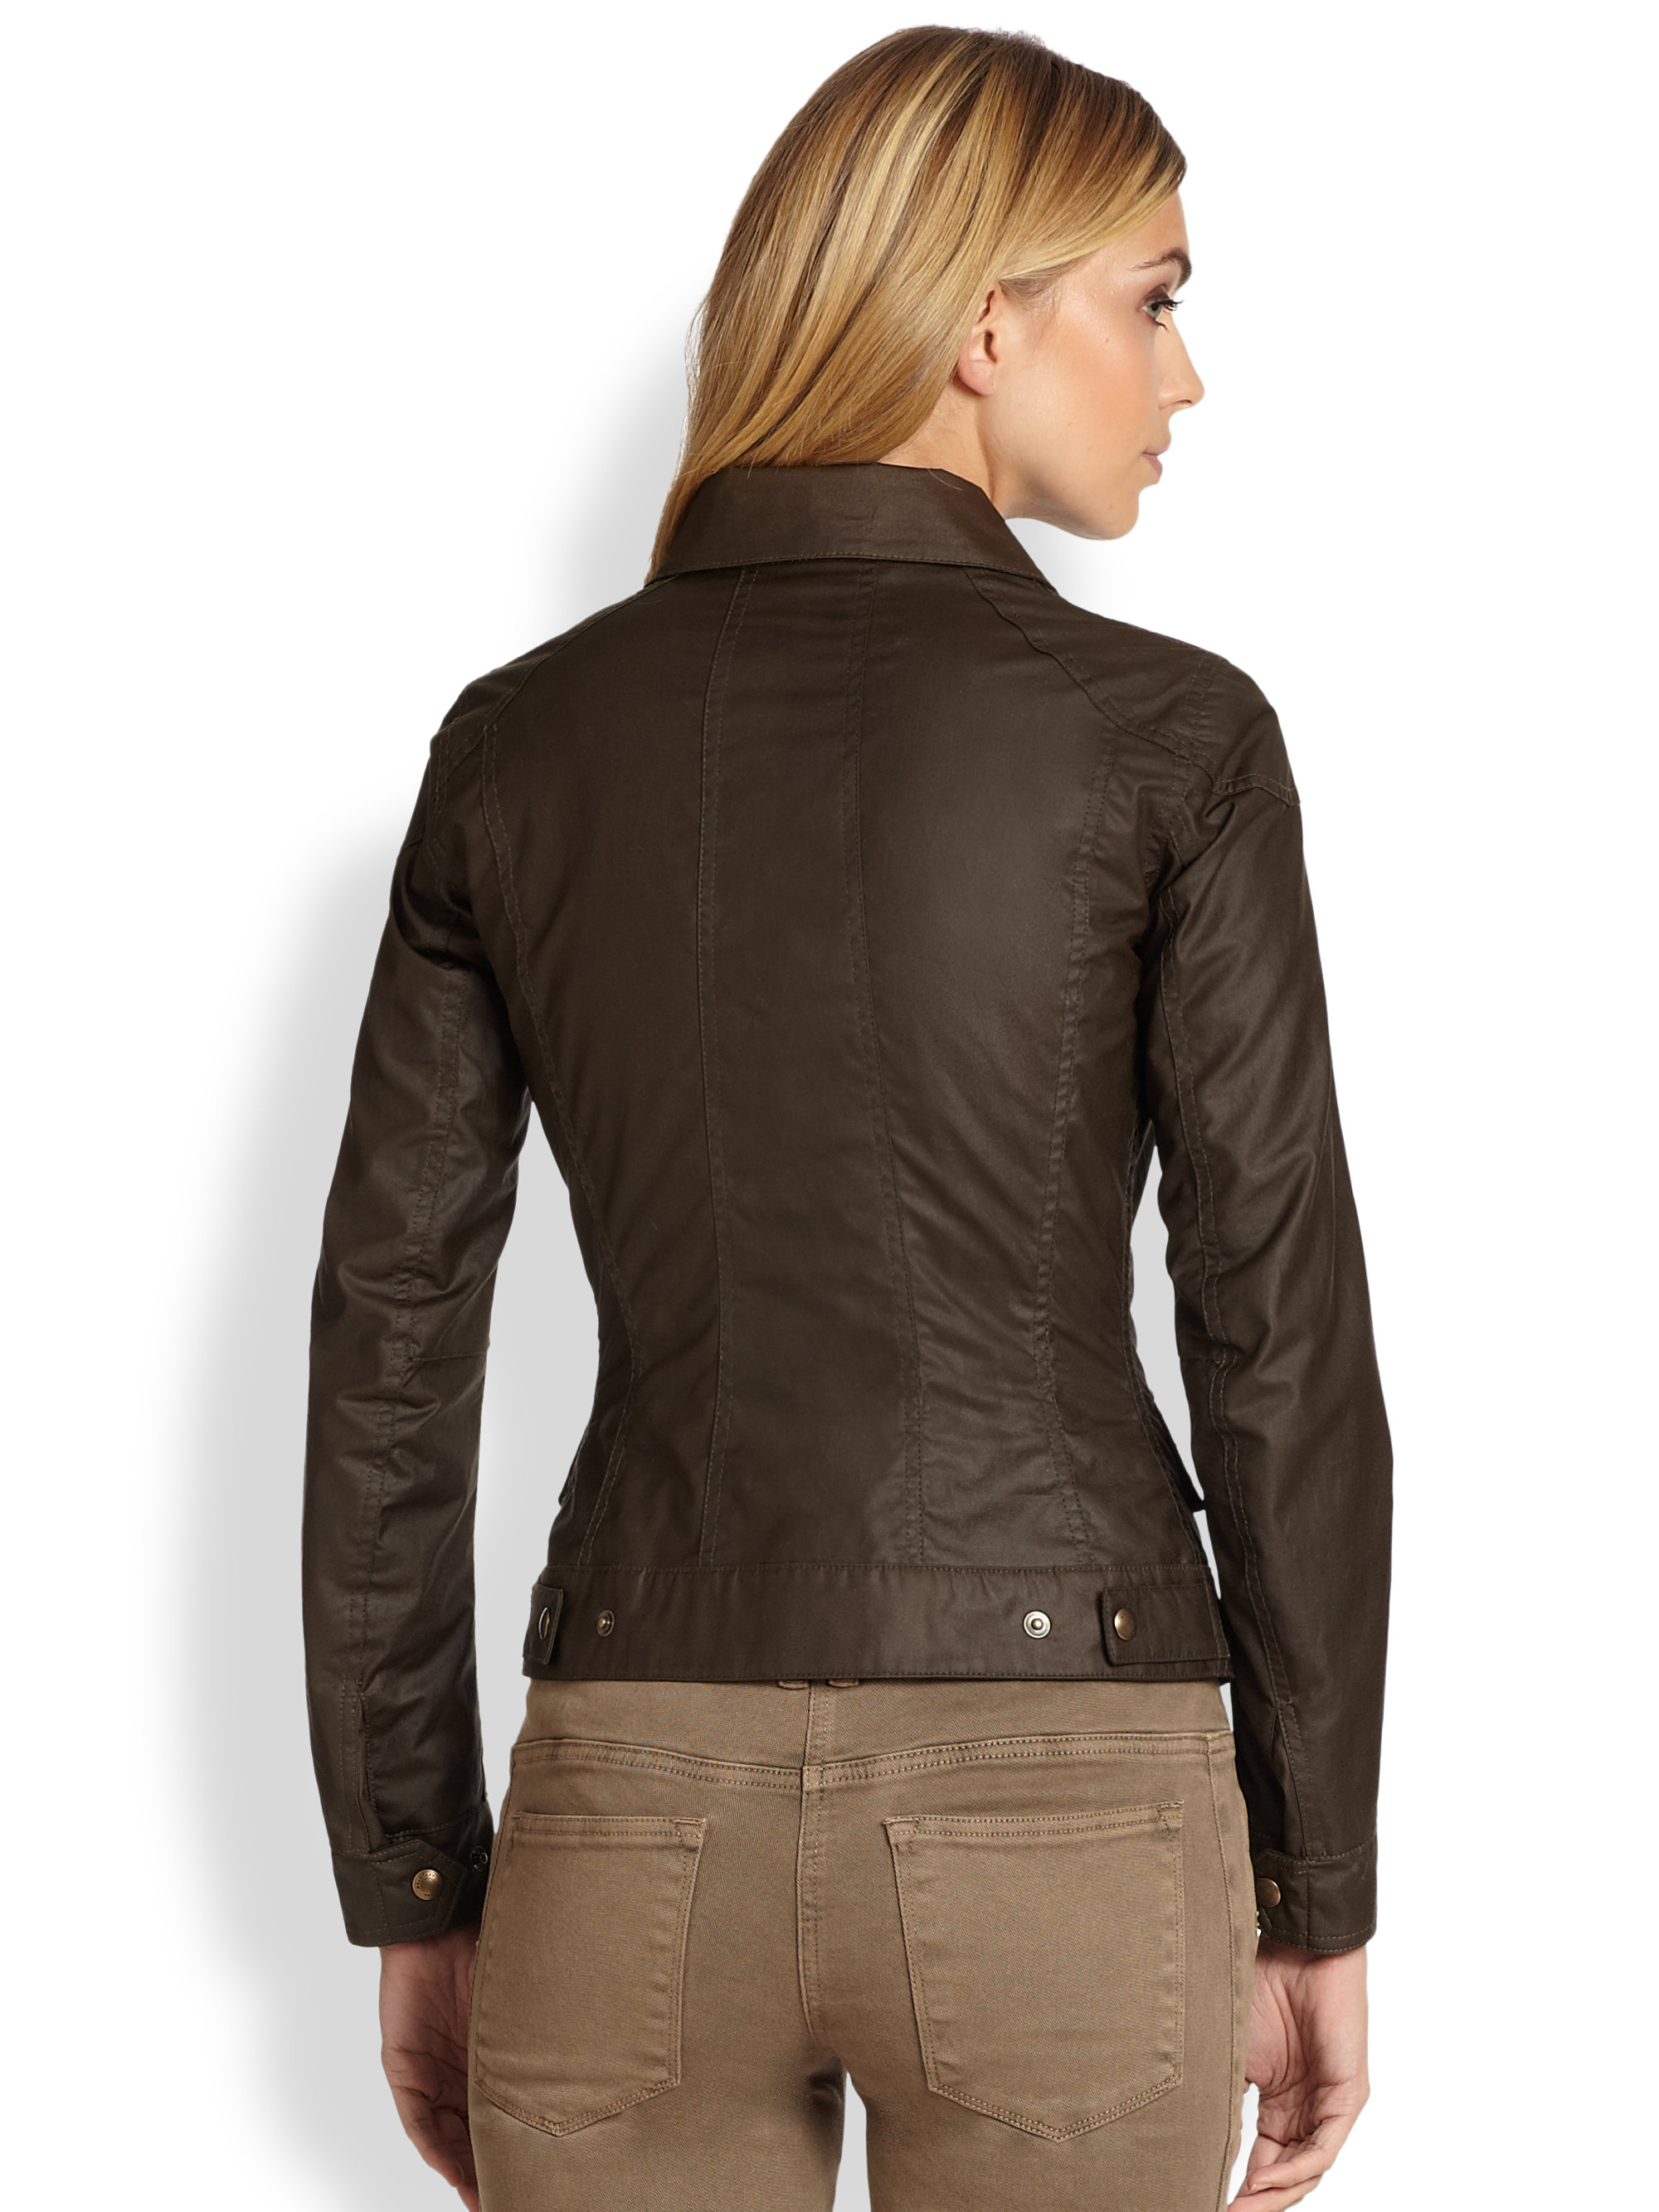 Lyst - Belstaff Waxed Cotton Colby Jacket in Green